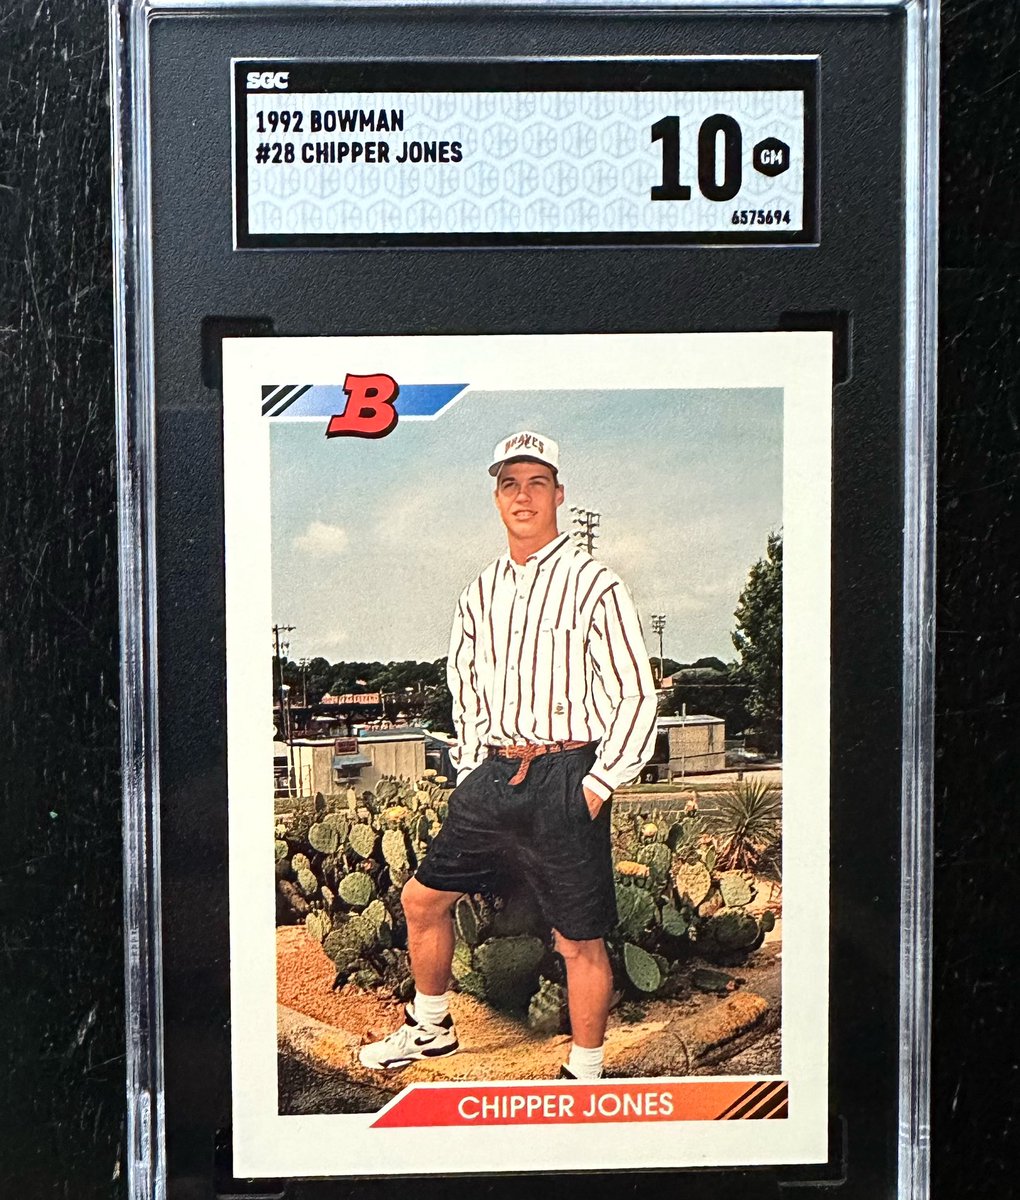 Junk Wax Beauty Added To My PC! 1992 Bowman Chipper Jones Rookie Card. The styled belt I did as a teenager, pleated shorts, and Nike’s! 90’s legend on the field and for style. #junkwax #chipperjones #bowman #baseballcards #baseballcard #sportscards #sportscard #90s